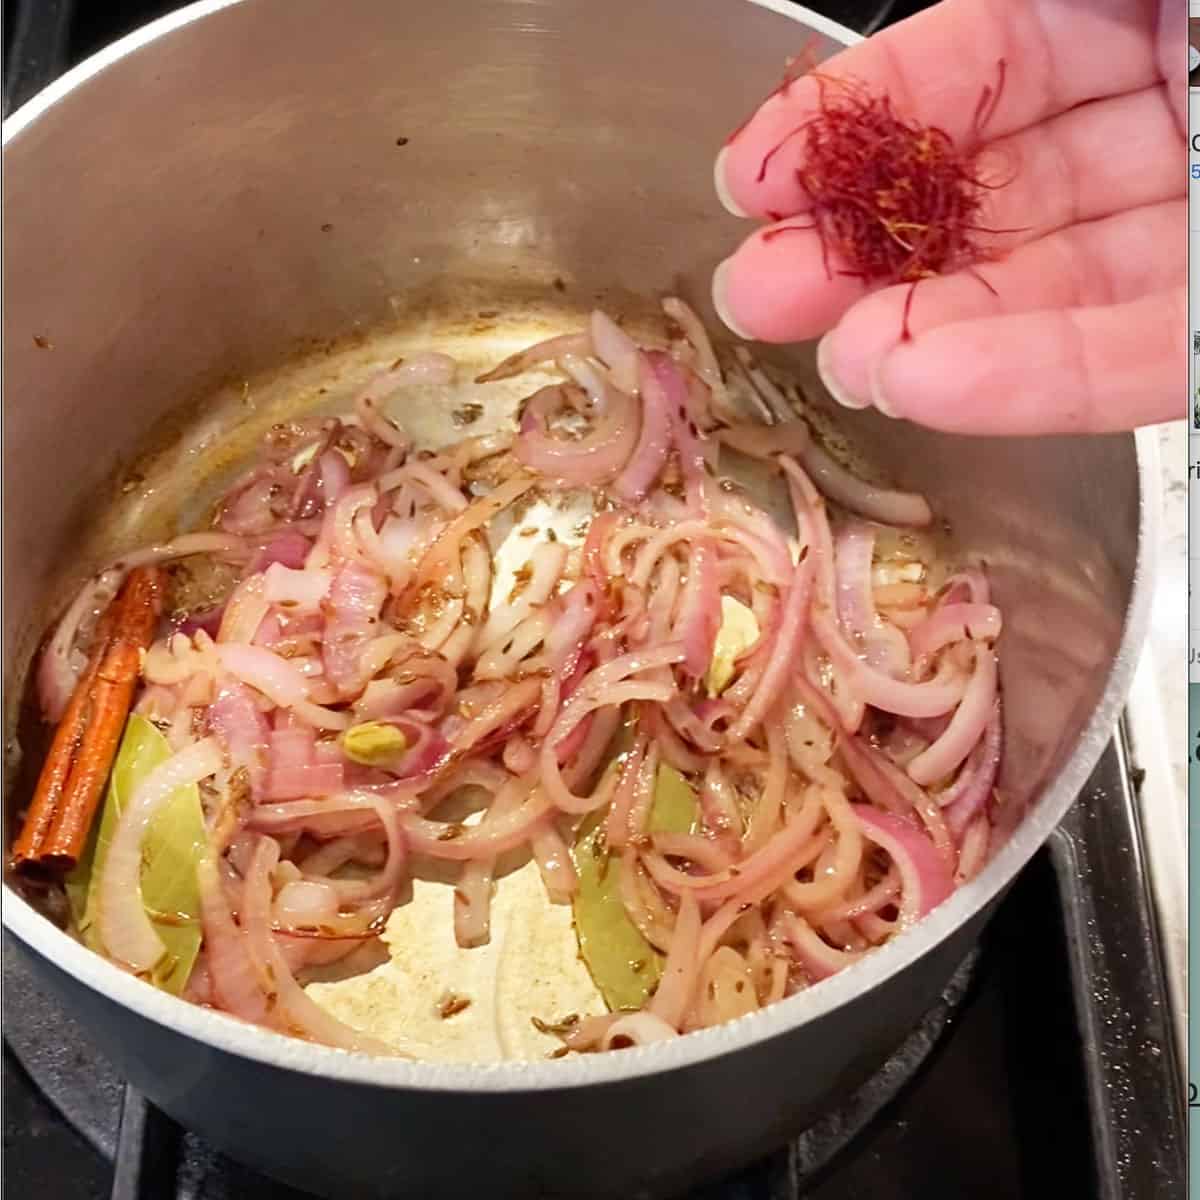 small saucepan with whole spice; cinnamon, cardamom, bay leaves, and sliced red onions, and a hand holding a pile of saffron threads.